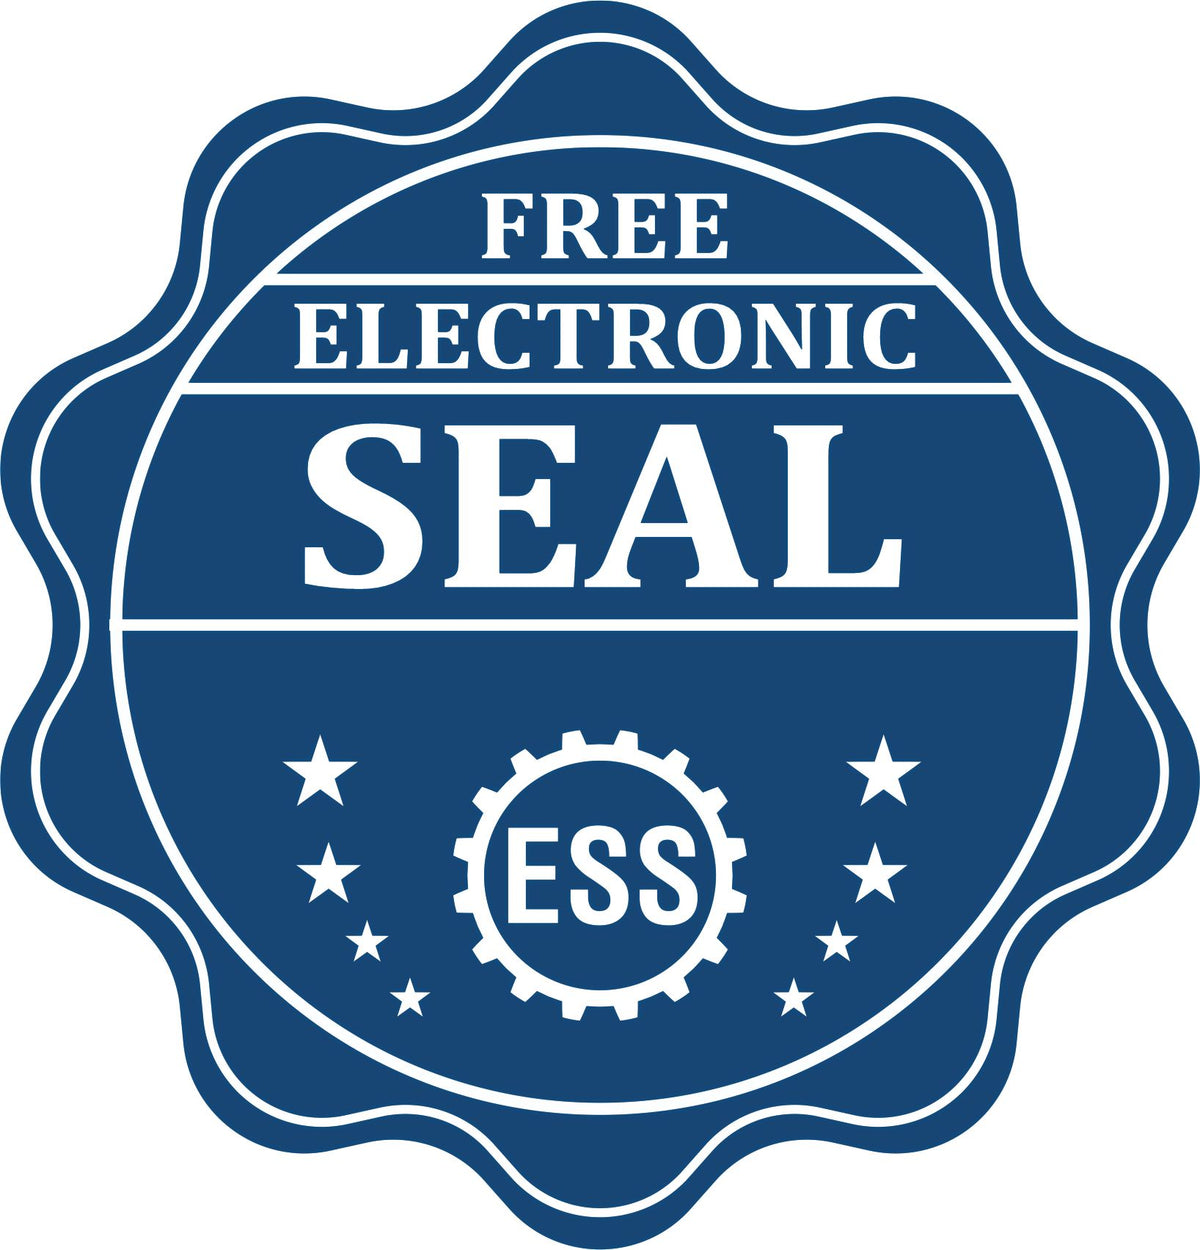 A badge showing a free electronic seal for the Kentucky Desk Surveyor Seal Embosser with stars and the ESS gear on the emblem.